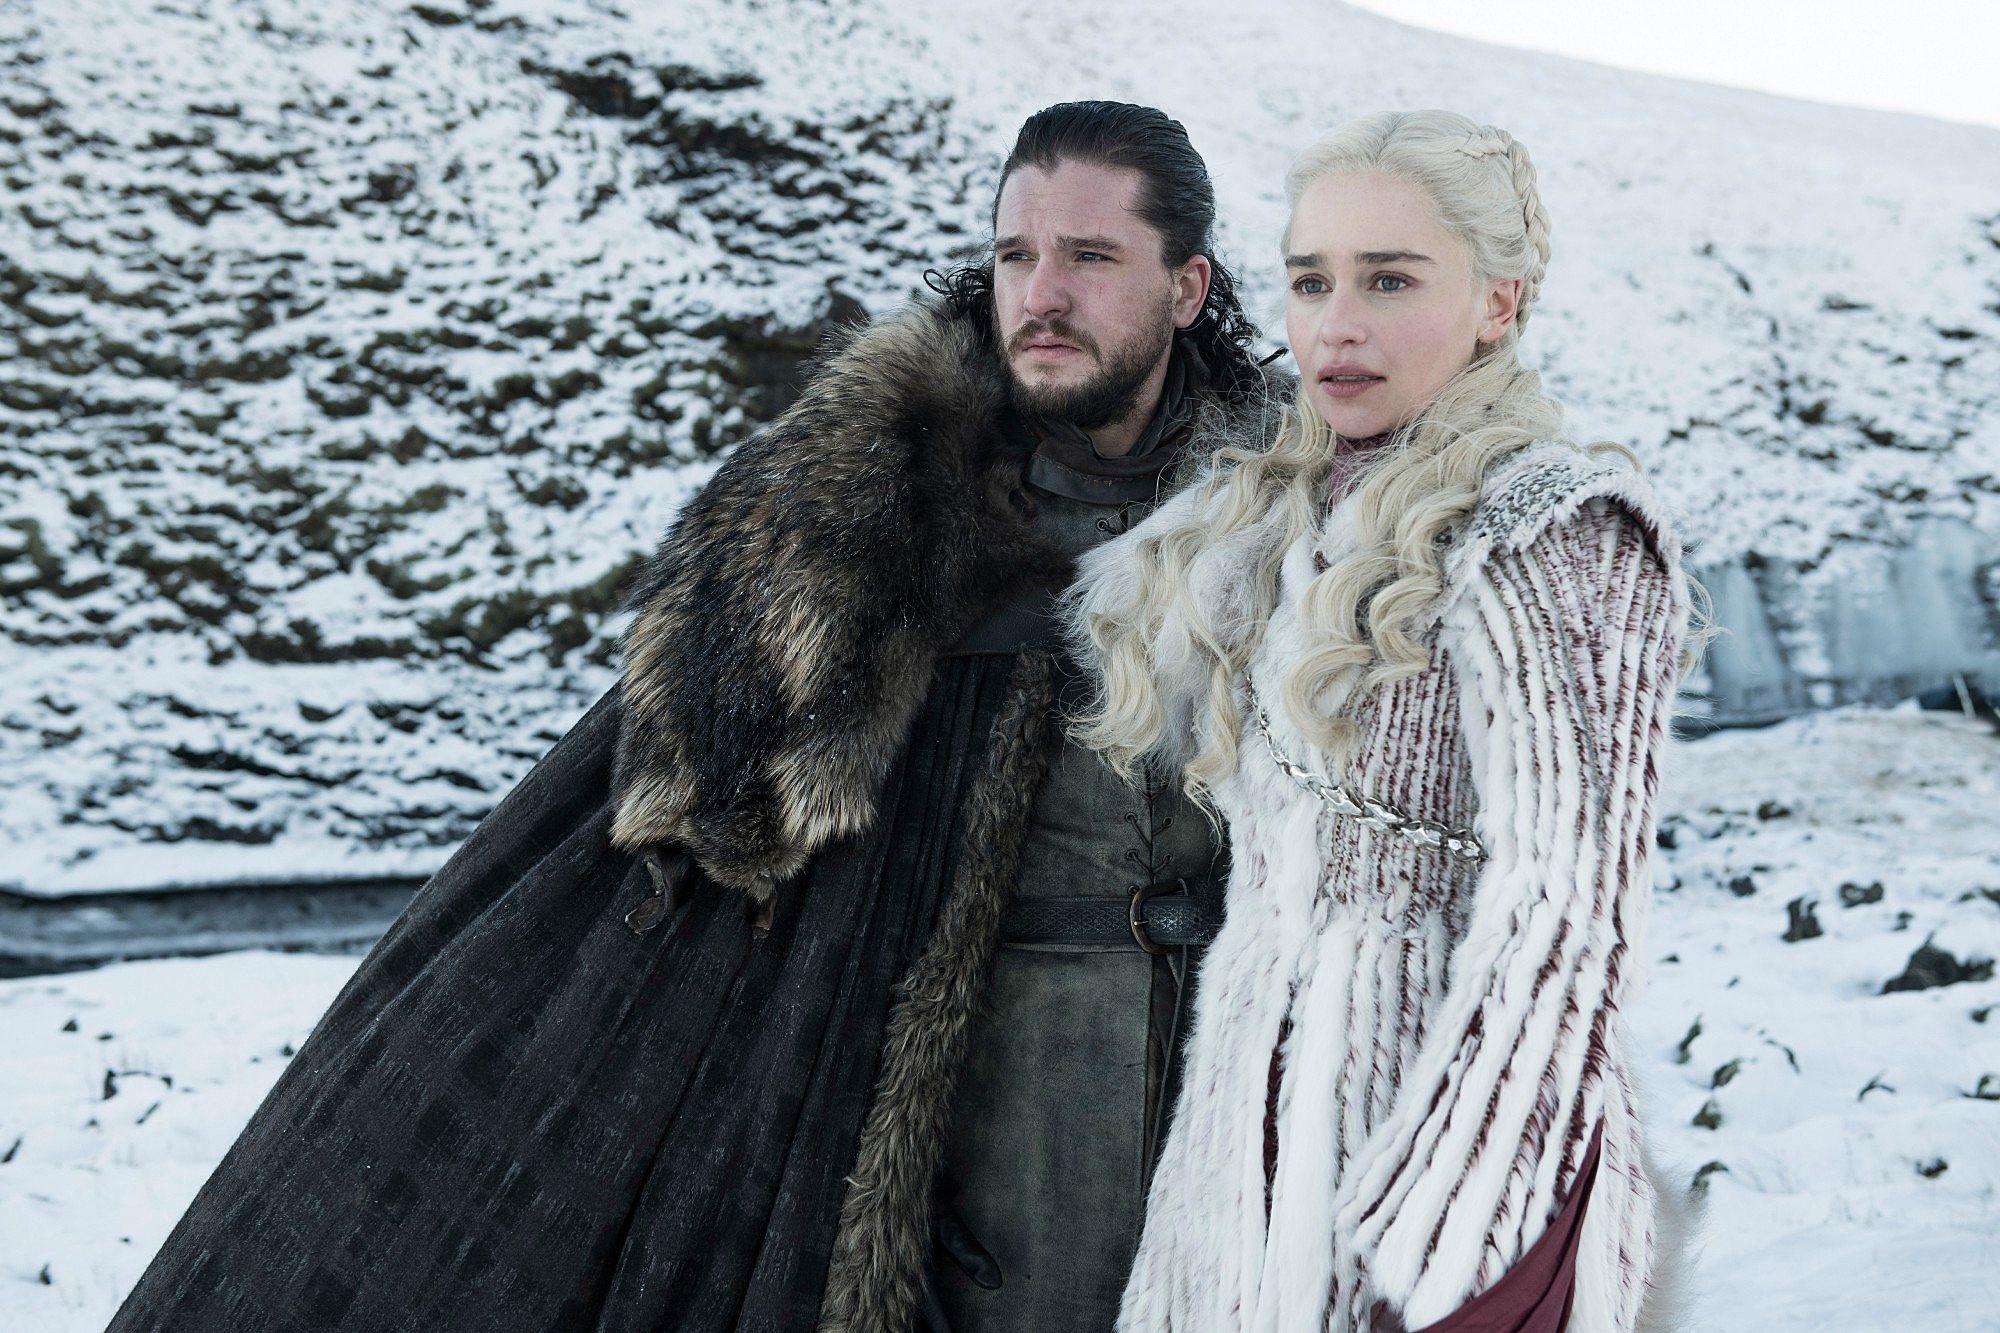 First official image from Game of Thrones season 8!